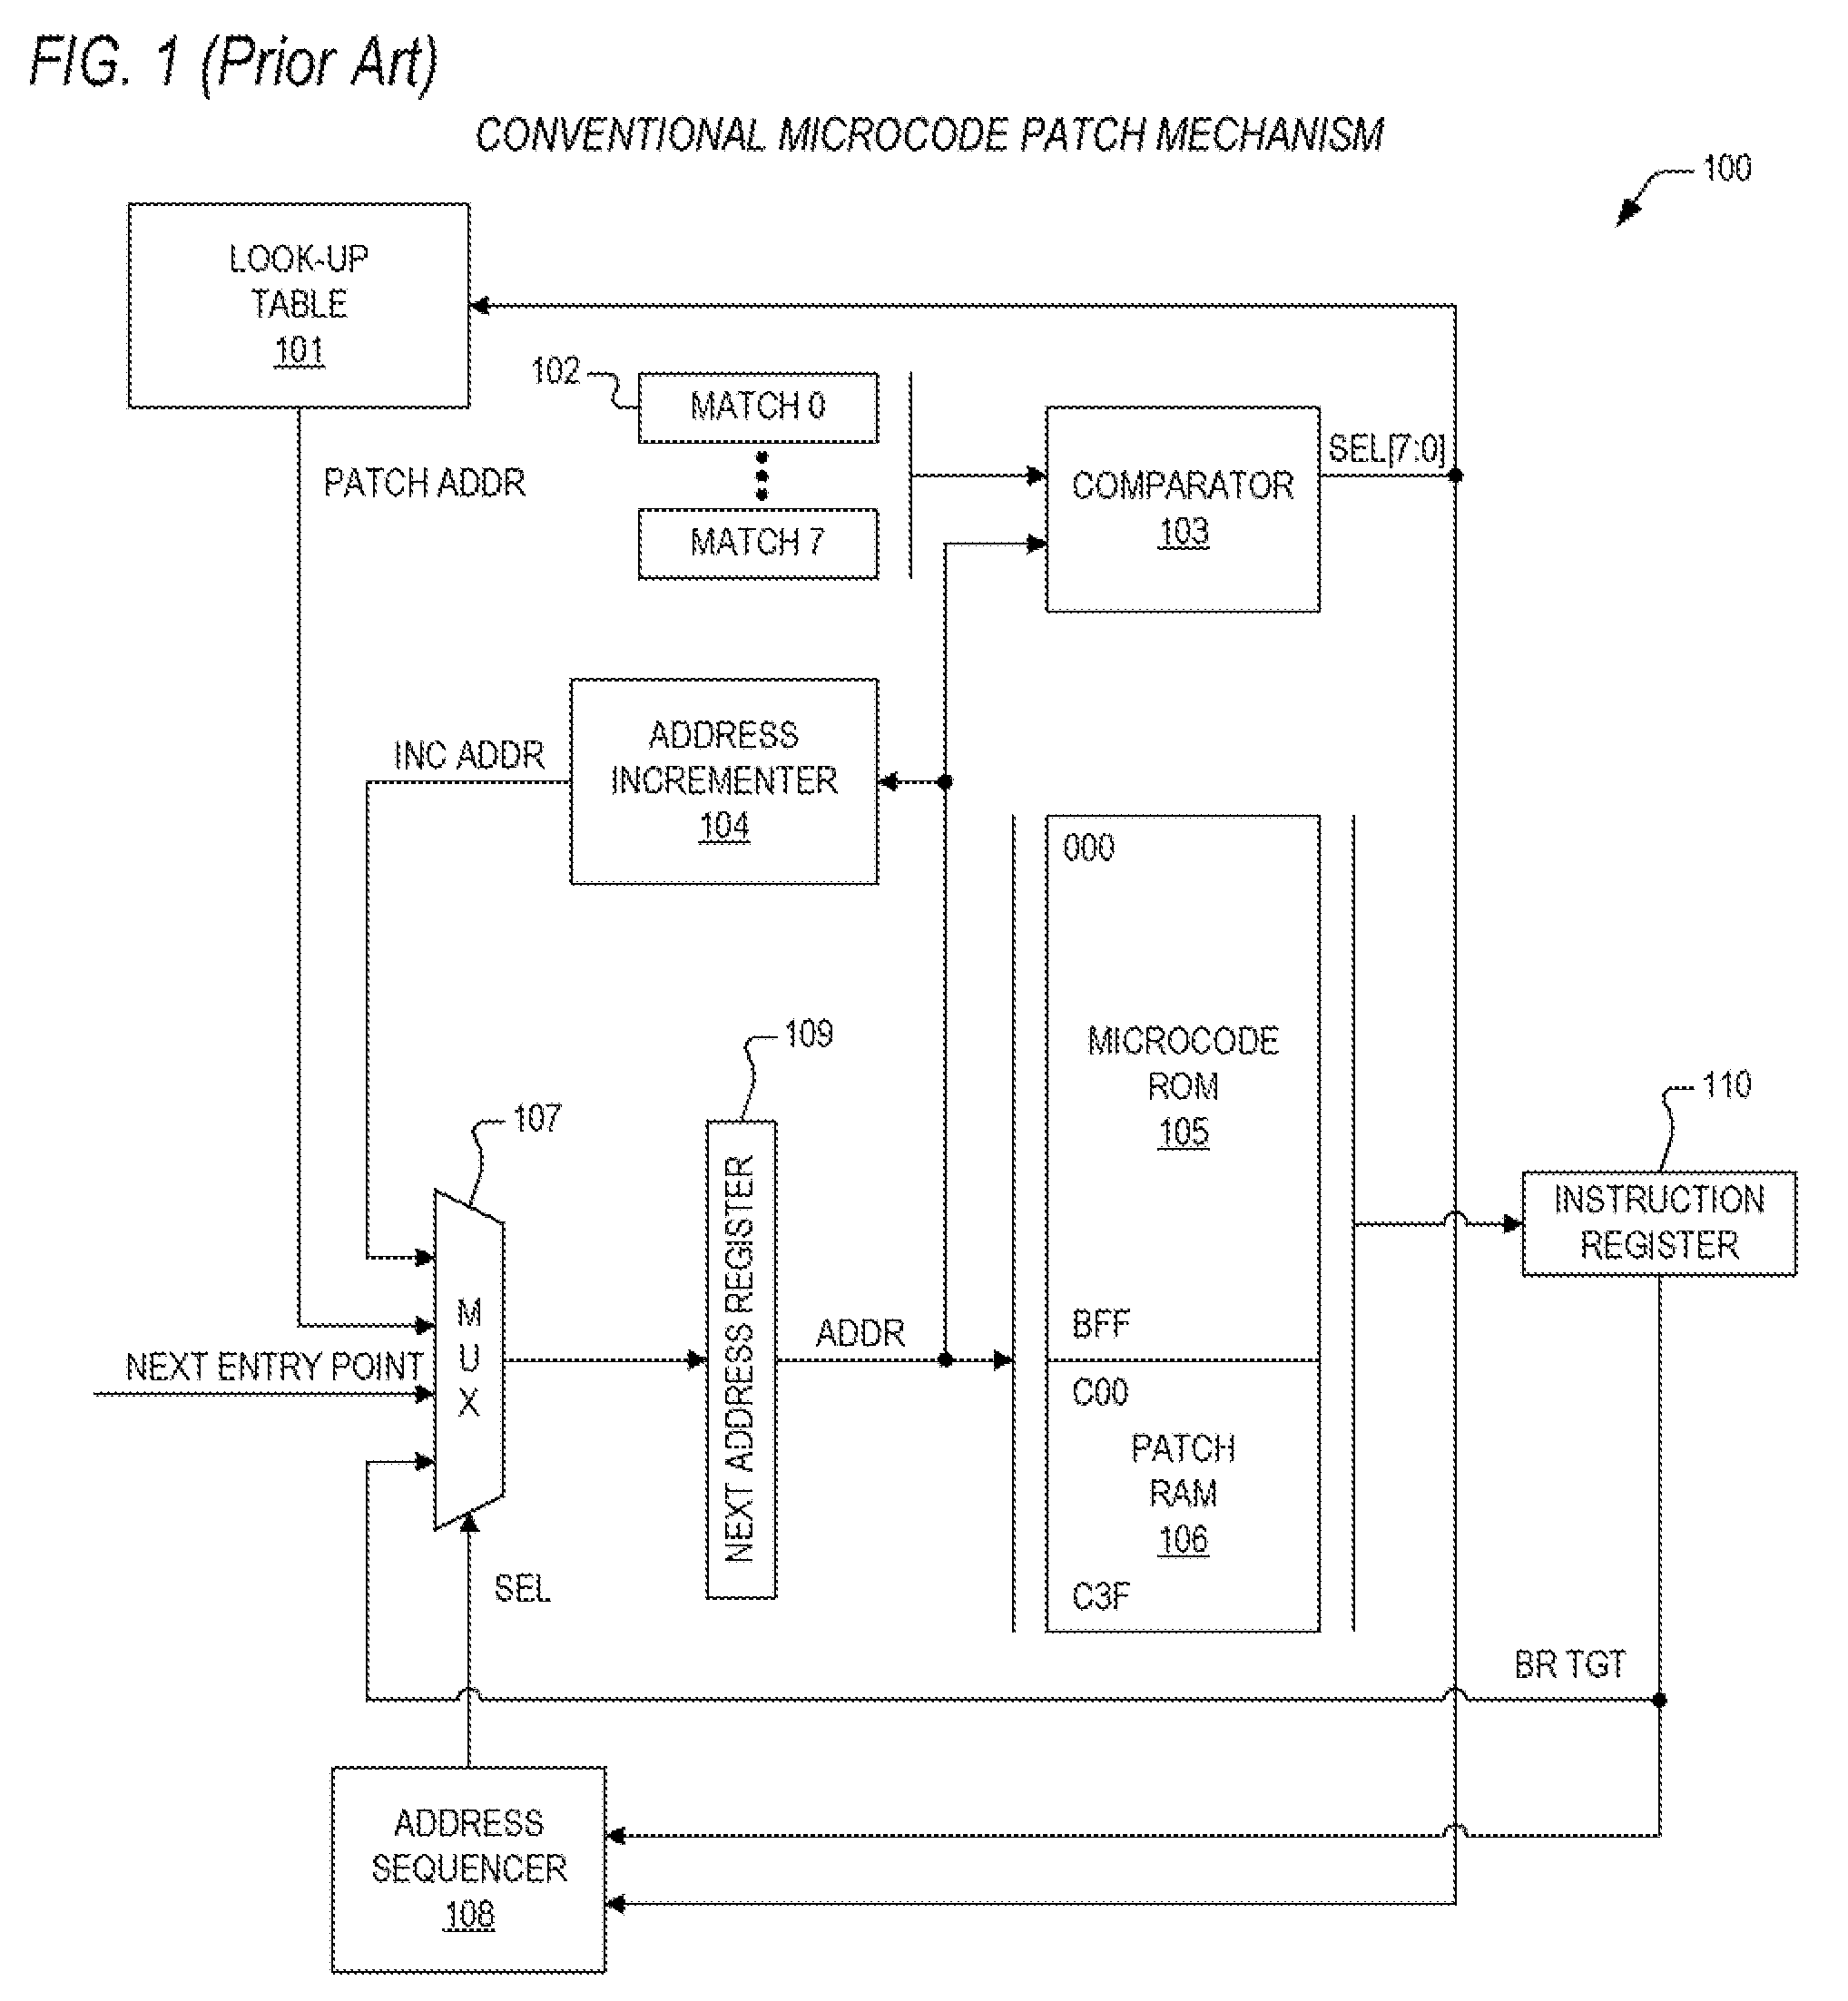 Apparatus and method for real-time microcode patch